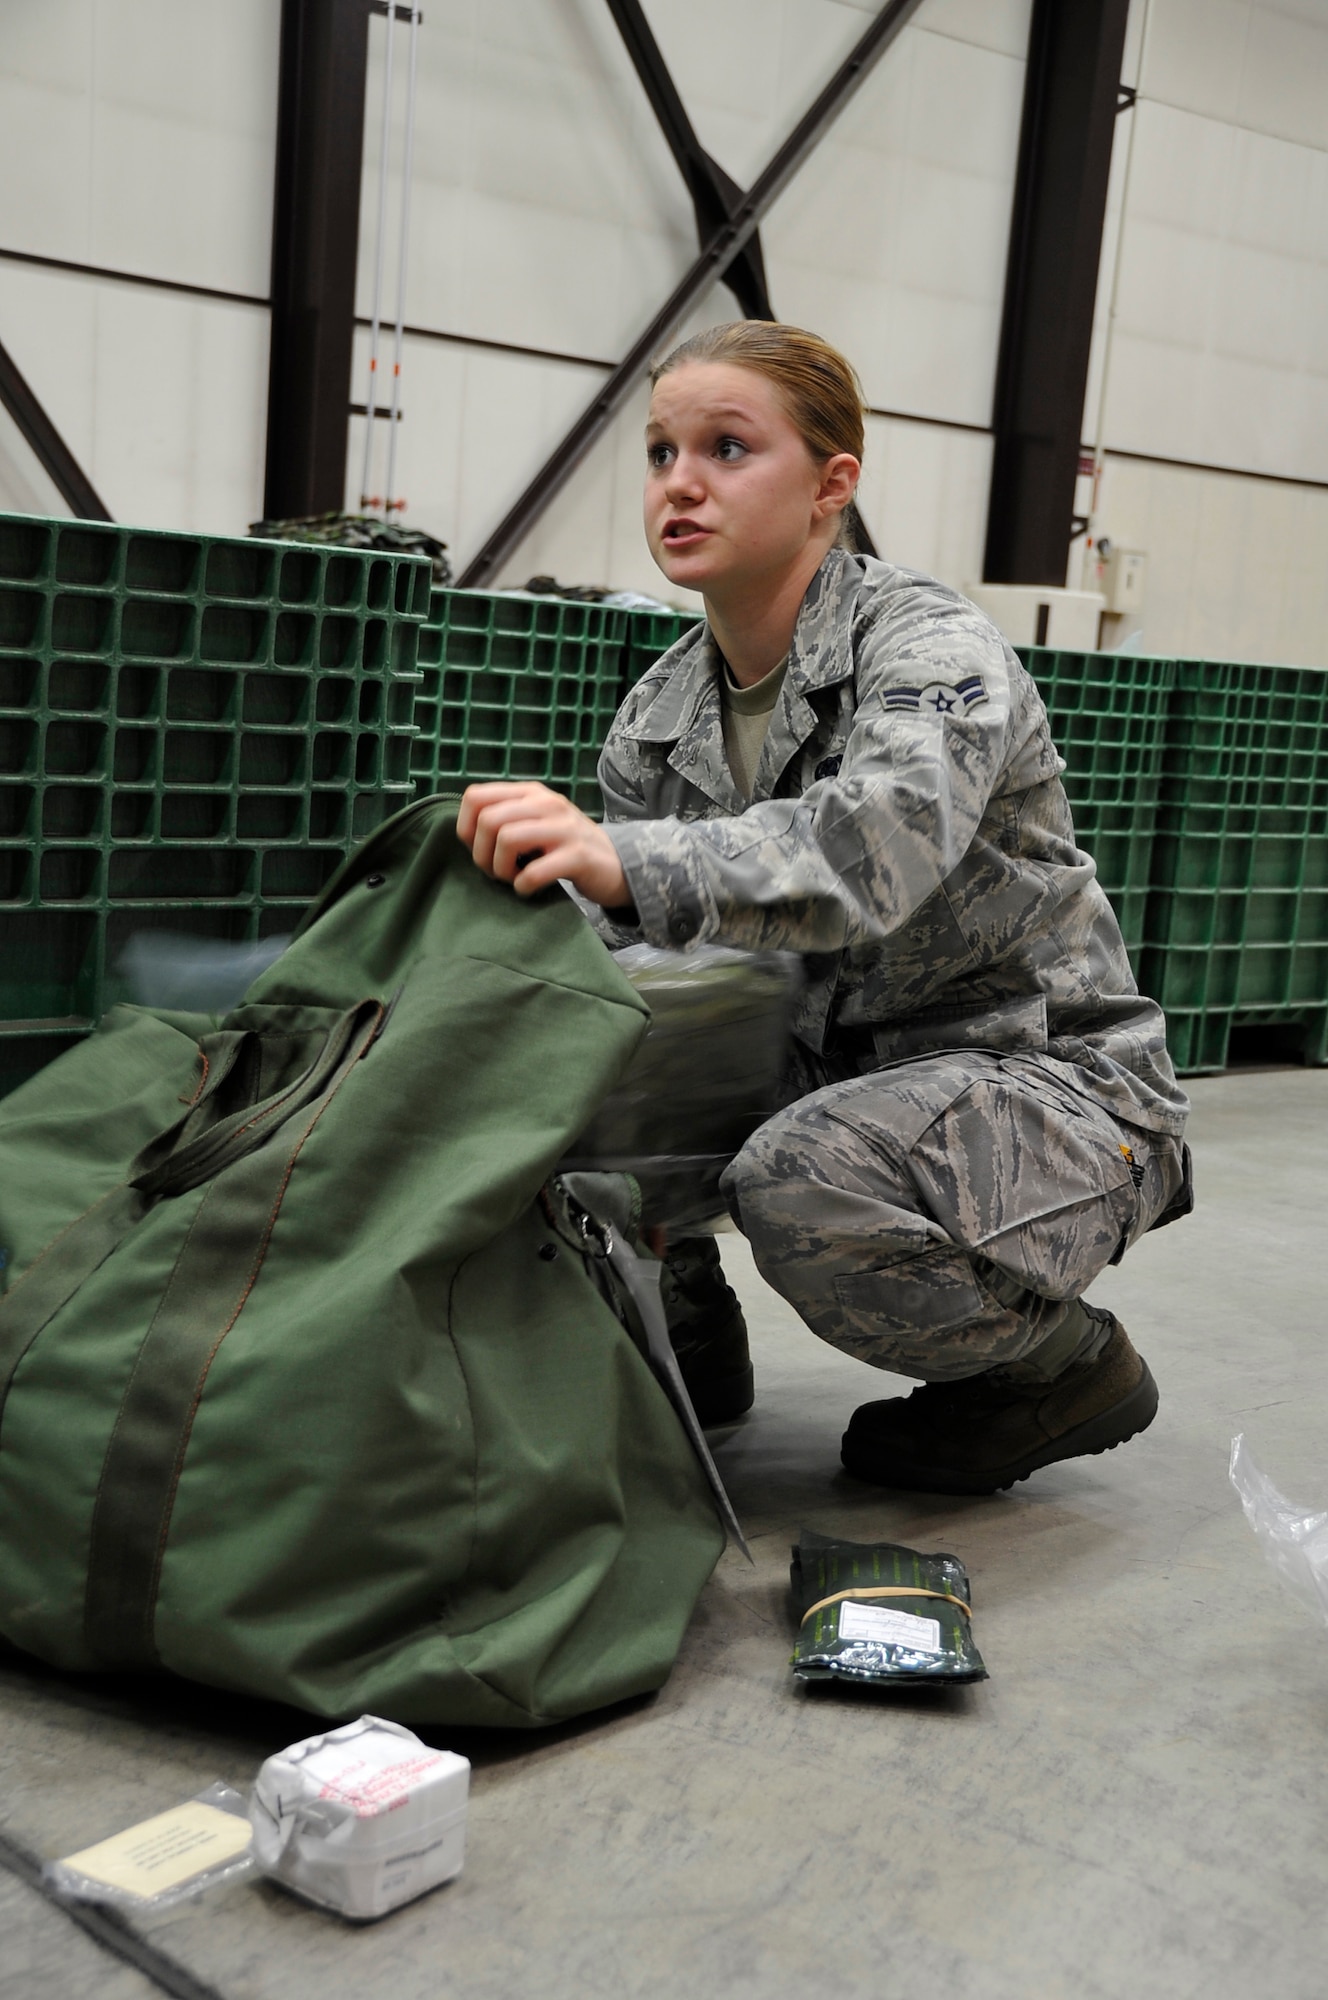 MISAWA AIR BASE, Japan -- Airman 1st Class Alexandria Shelly, 35th Logistics Readiness Squadron individual protective equipment element administrator, inspects a C-1 chemical protection bag Aug. 18 at Building 1334. The C-1 bag is one of three bags inspected during a pre-deployment exercise. (U.S. Air Force photo/Staff Sgt. Chad C. Strohmeyer) 